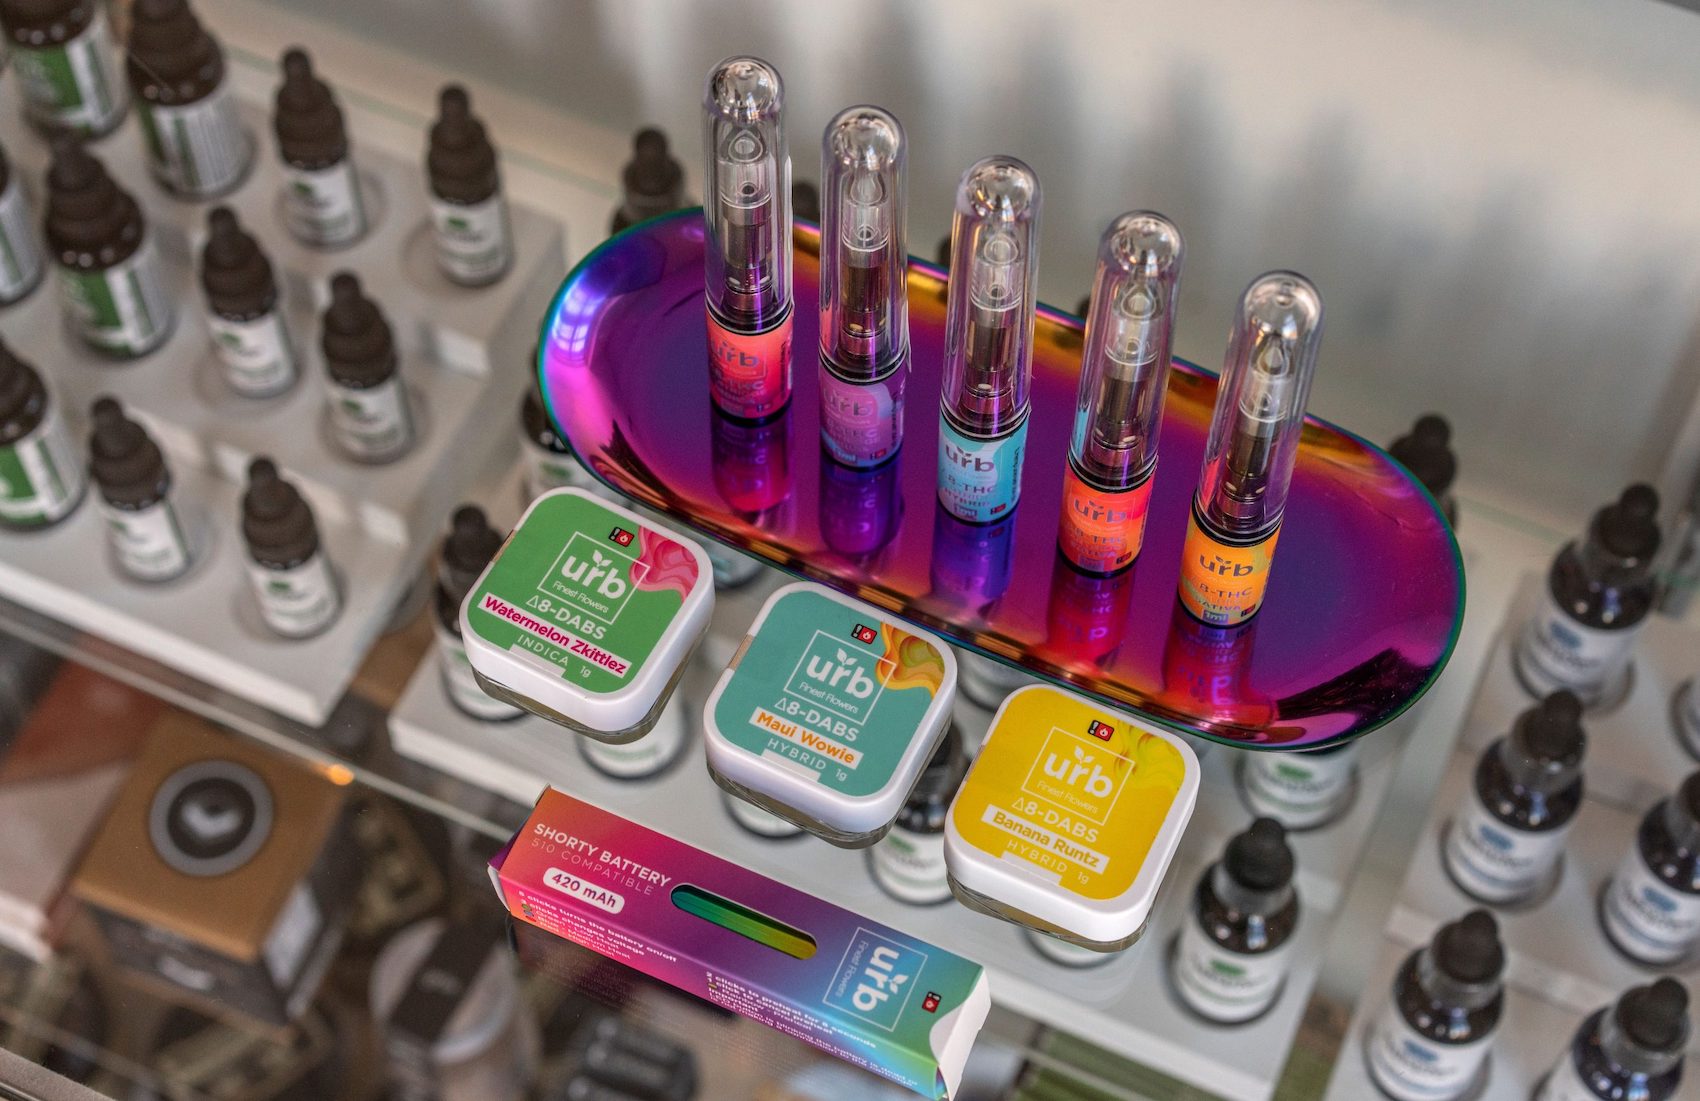 Quality delta-8 THC dabs products on display at store